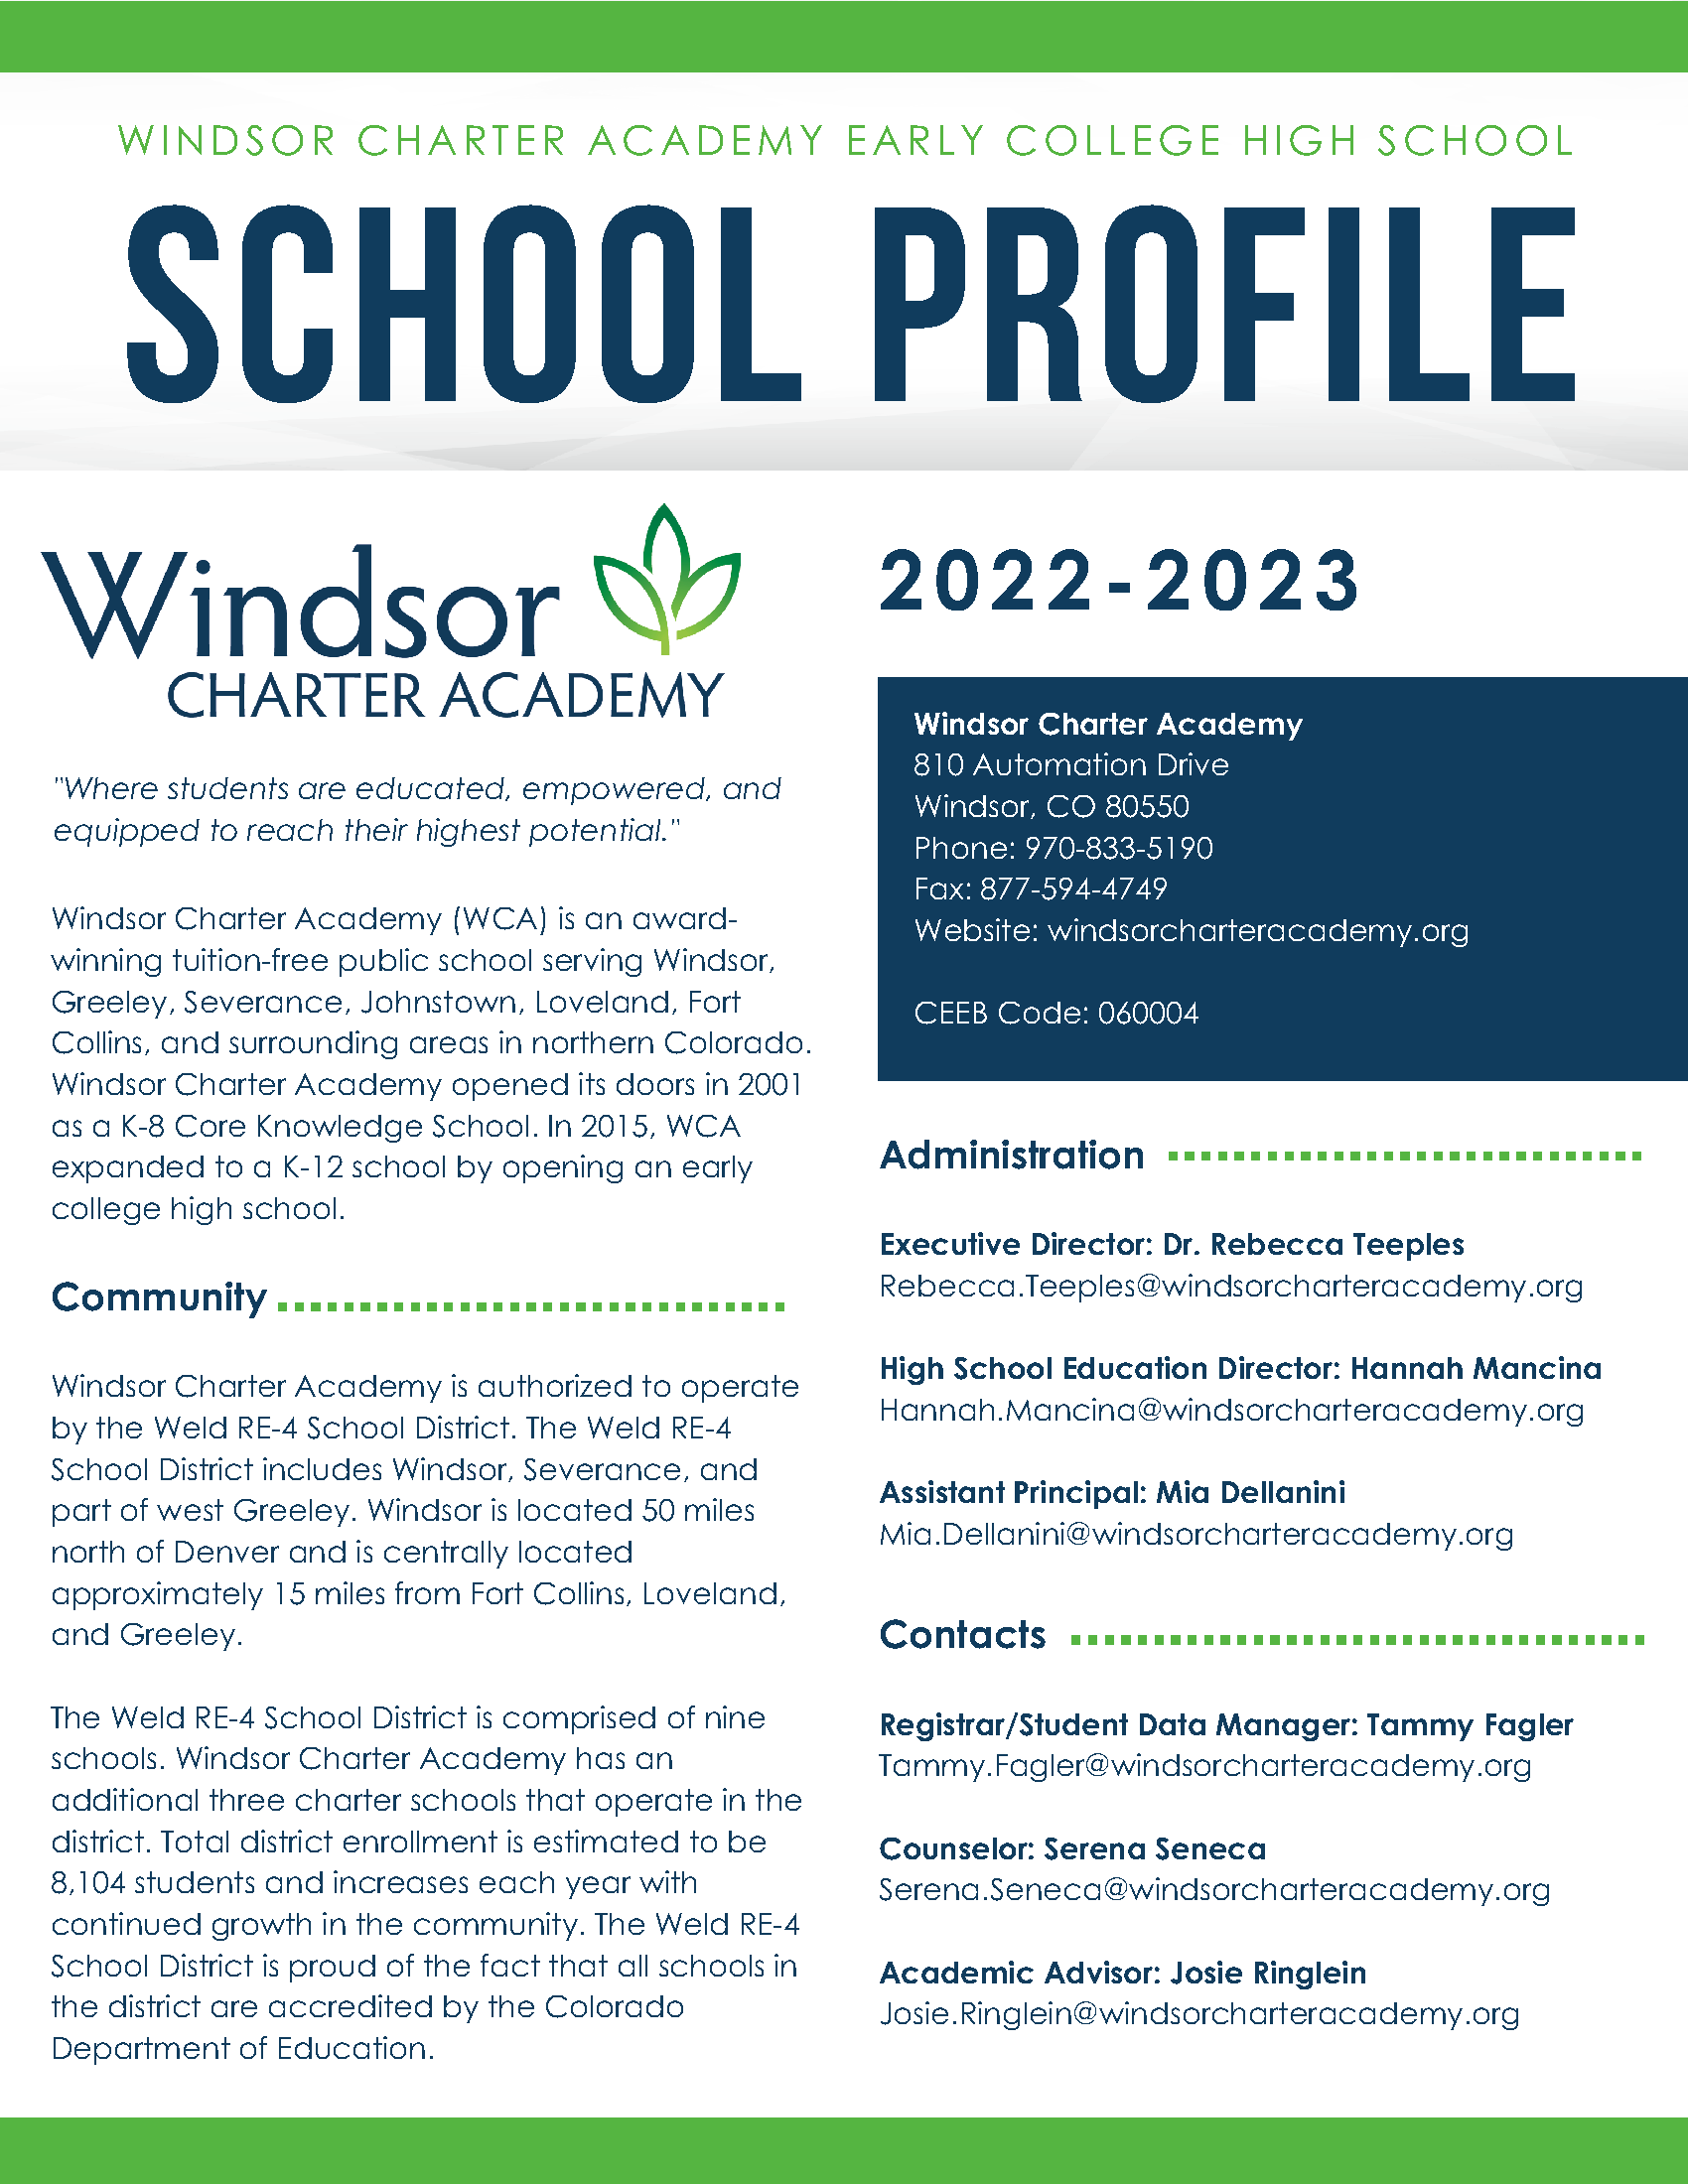 about-windsor-charter-academy